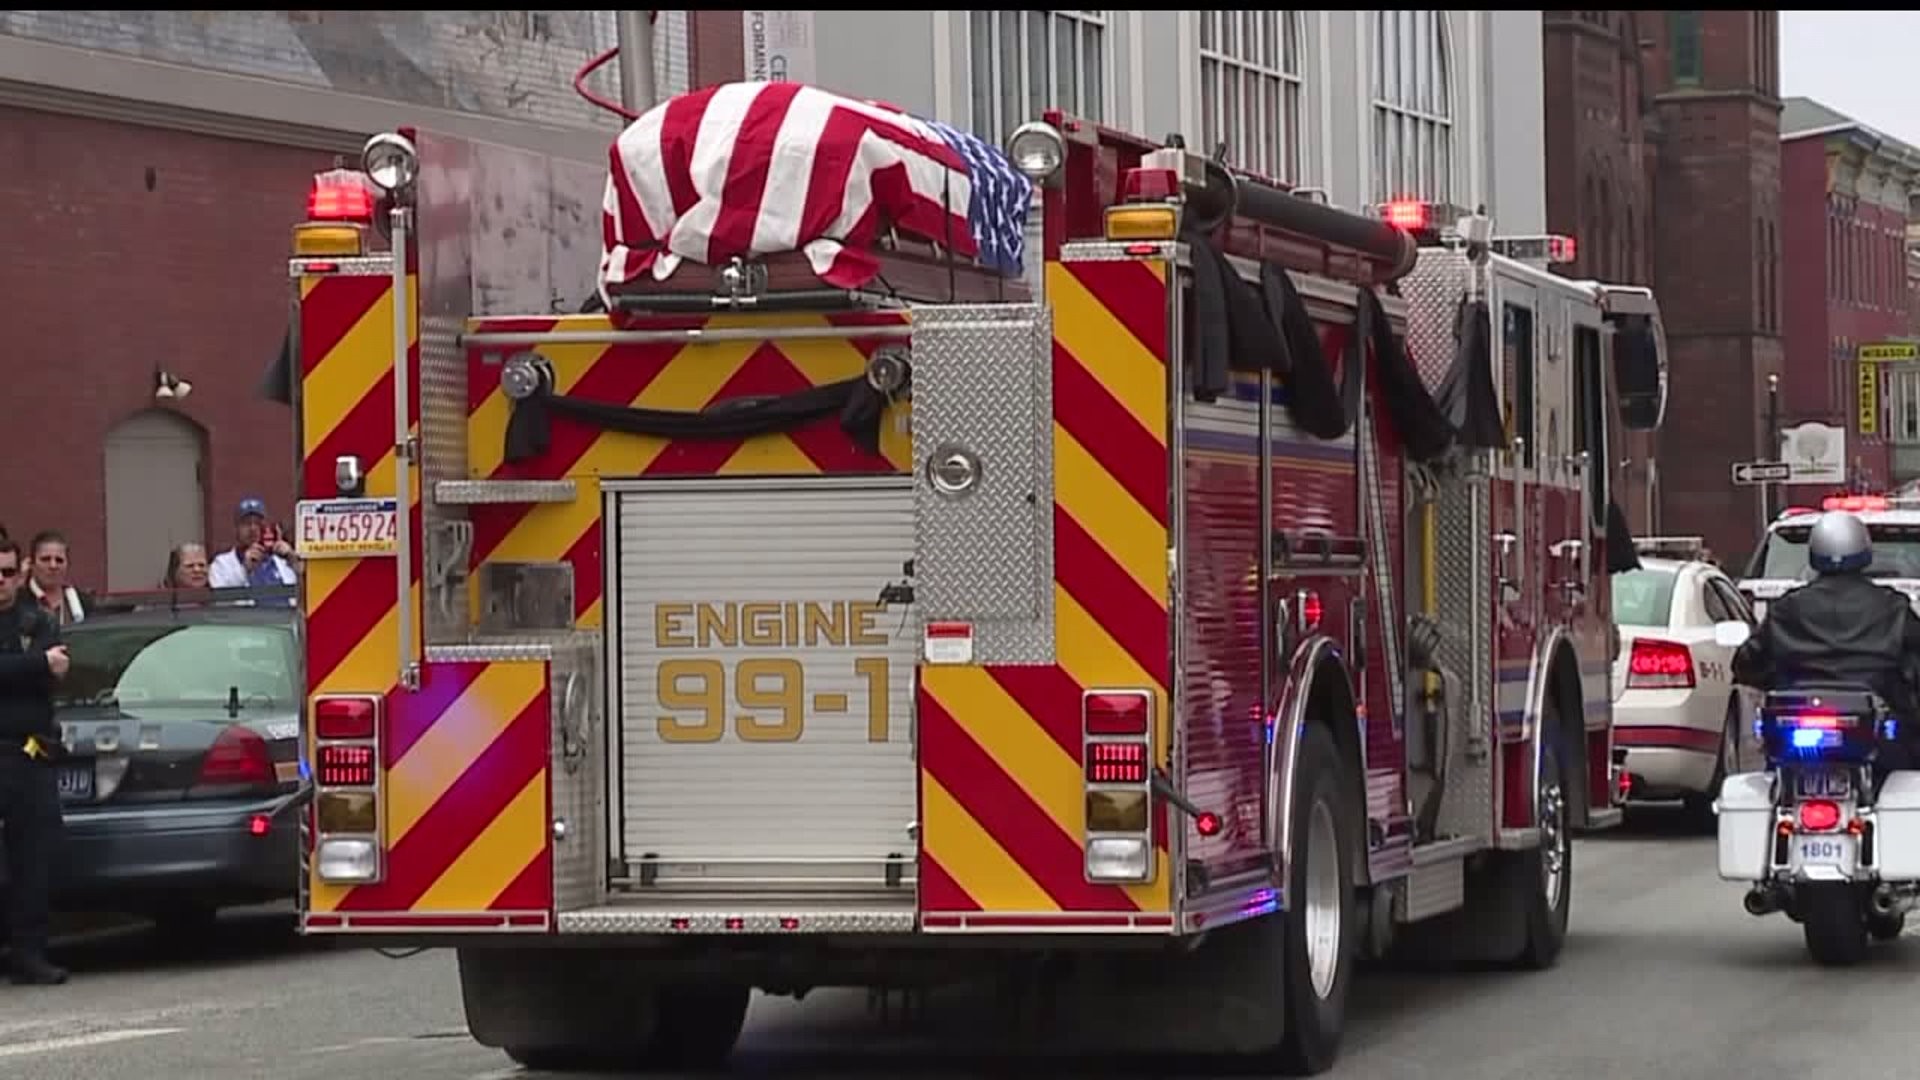 Firefighter Anthony funeral procession